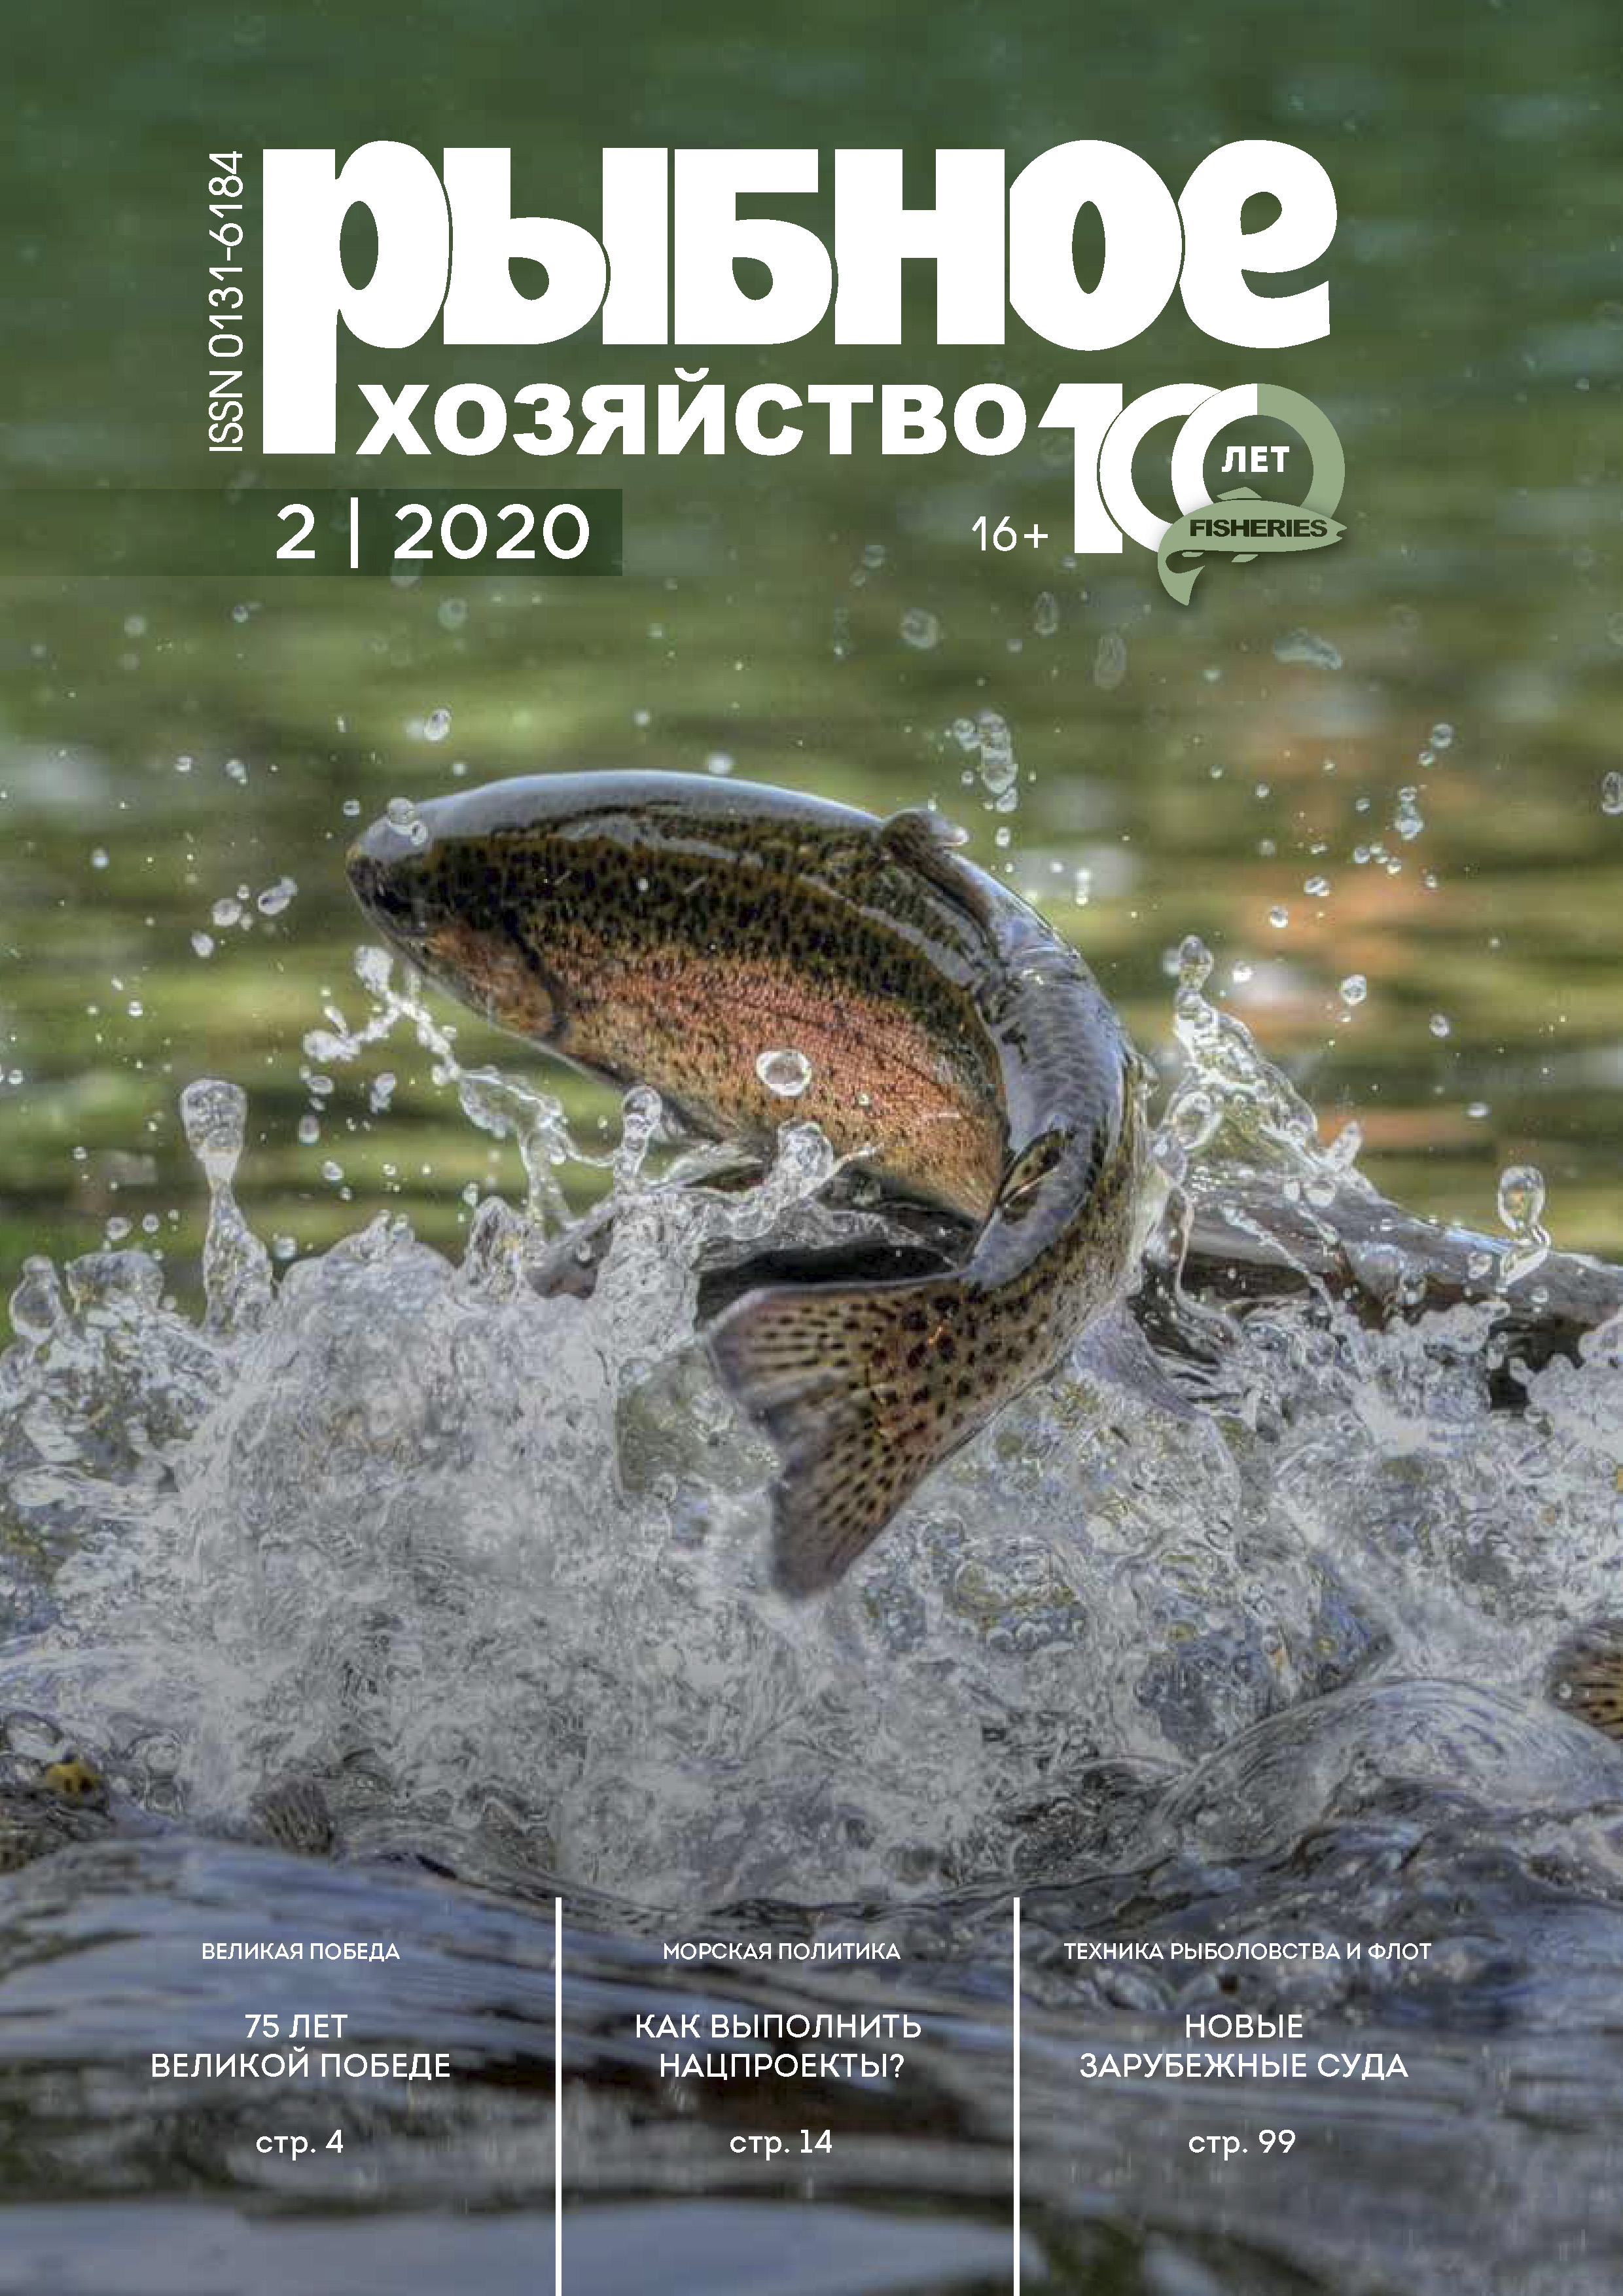                         THE COOPERATION BETWEEN THE RUSSIAN FEDERATION AND THE UNITED KINGDOM IN THE FIELD OF FISHERIES: LAW AND POLICY
            